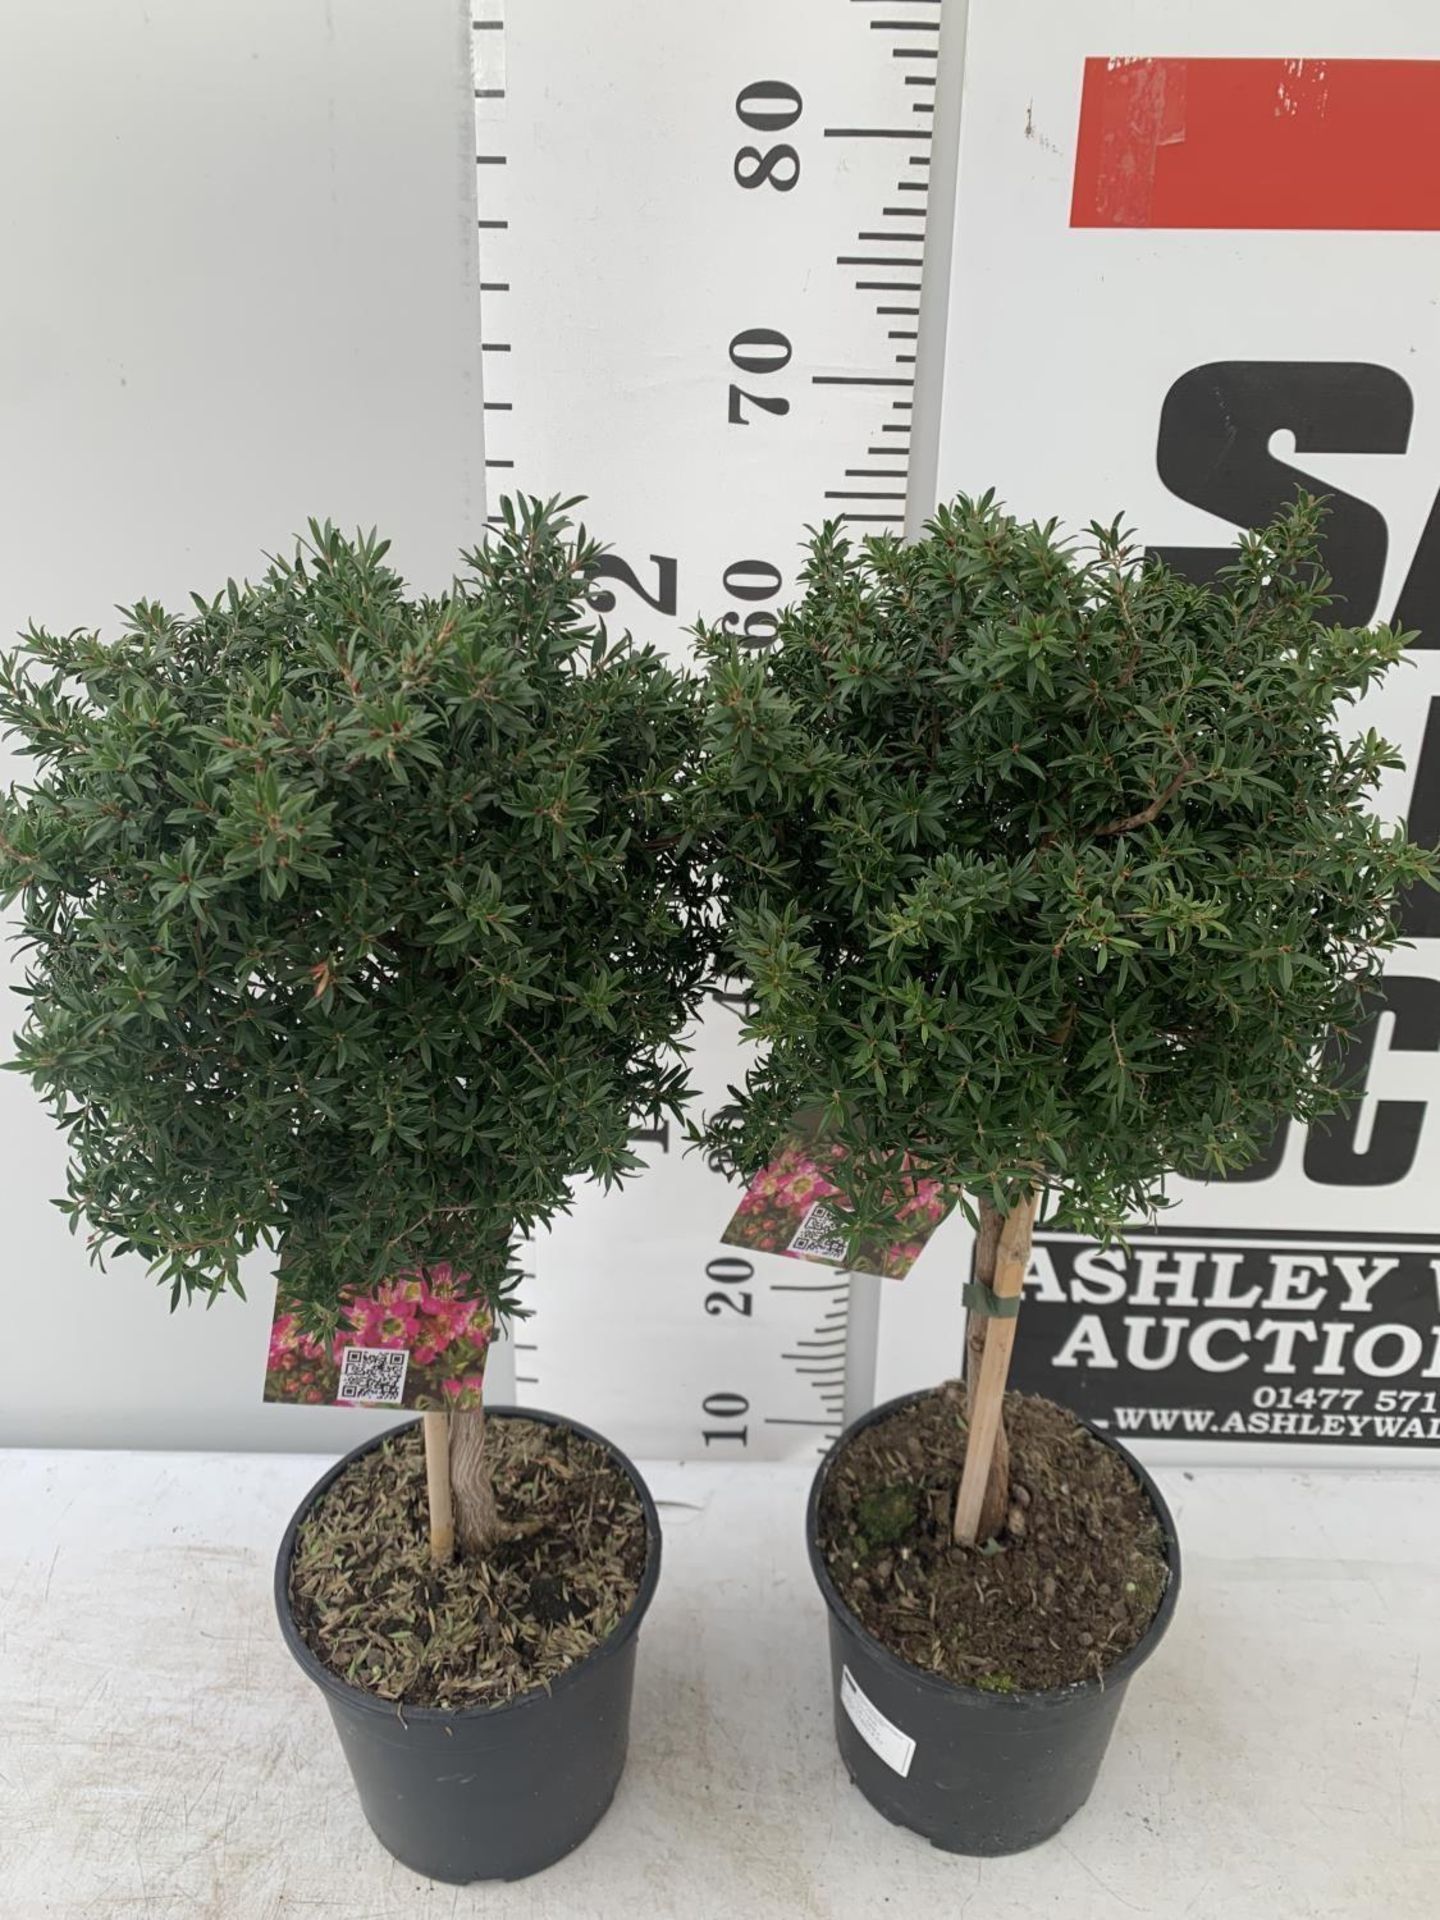 TWO LEPTOSPERMUM 'SUNSHINE' PINK STANDARD TREES APPROX 75CM IN HEIGHT IN FIVE LTR POTS PLUS VAT TO - Image 6 of 10